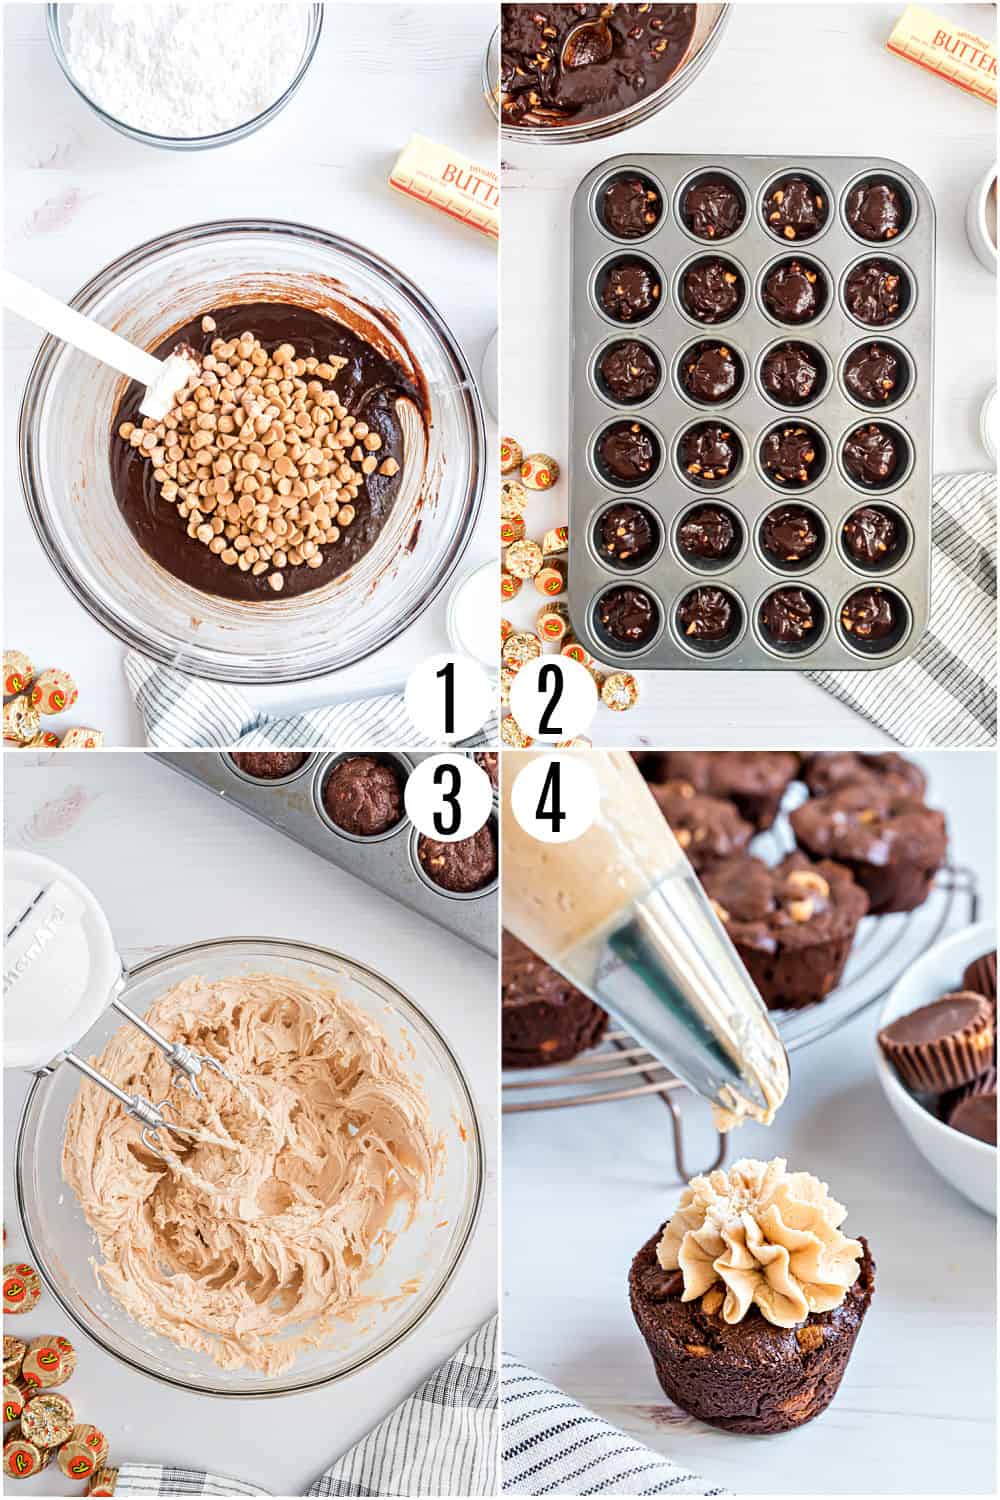 Step by step photos showing how to make peanut butter brownie bites.